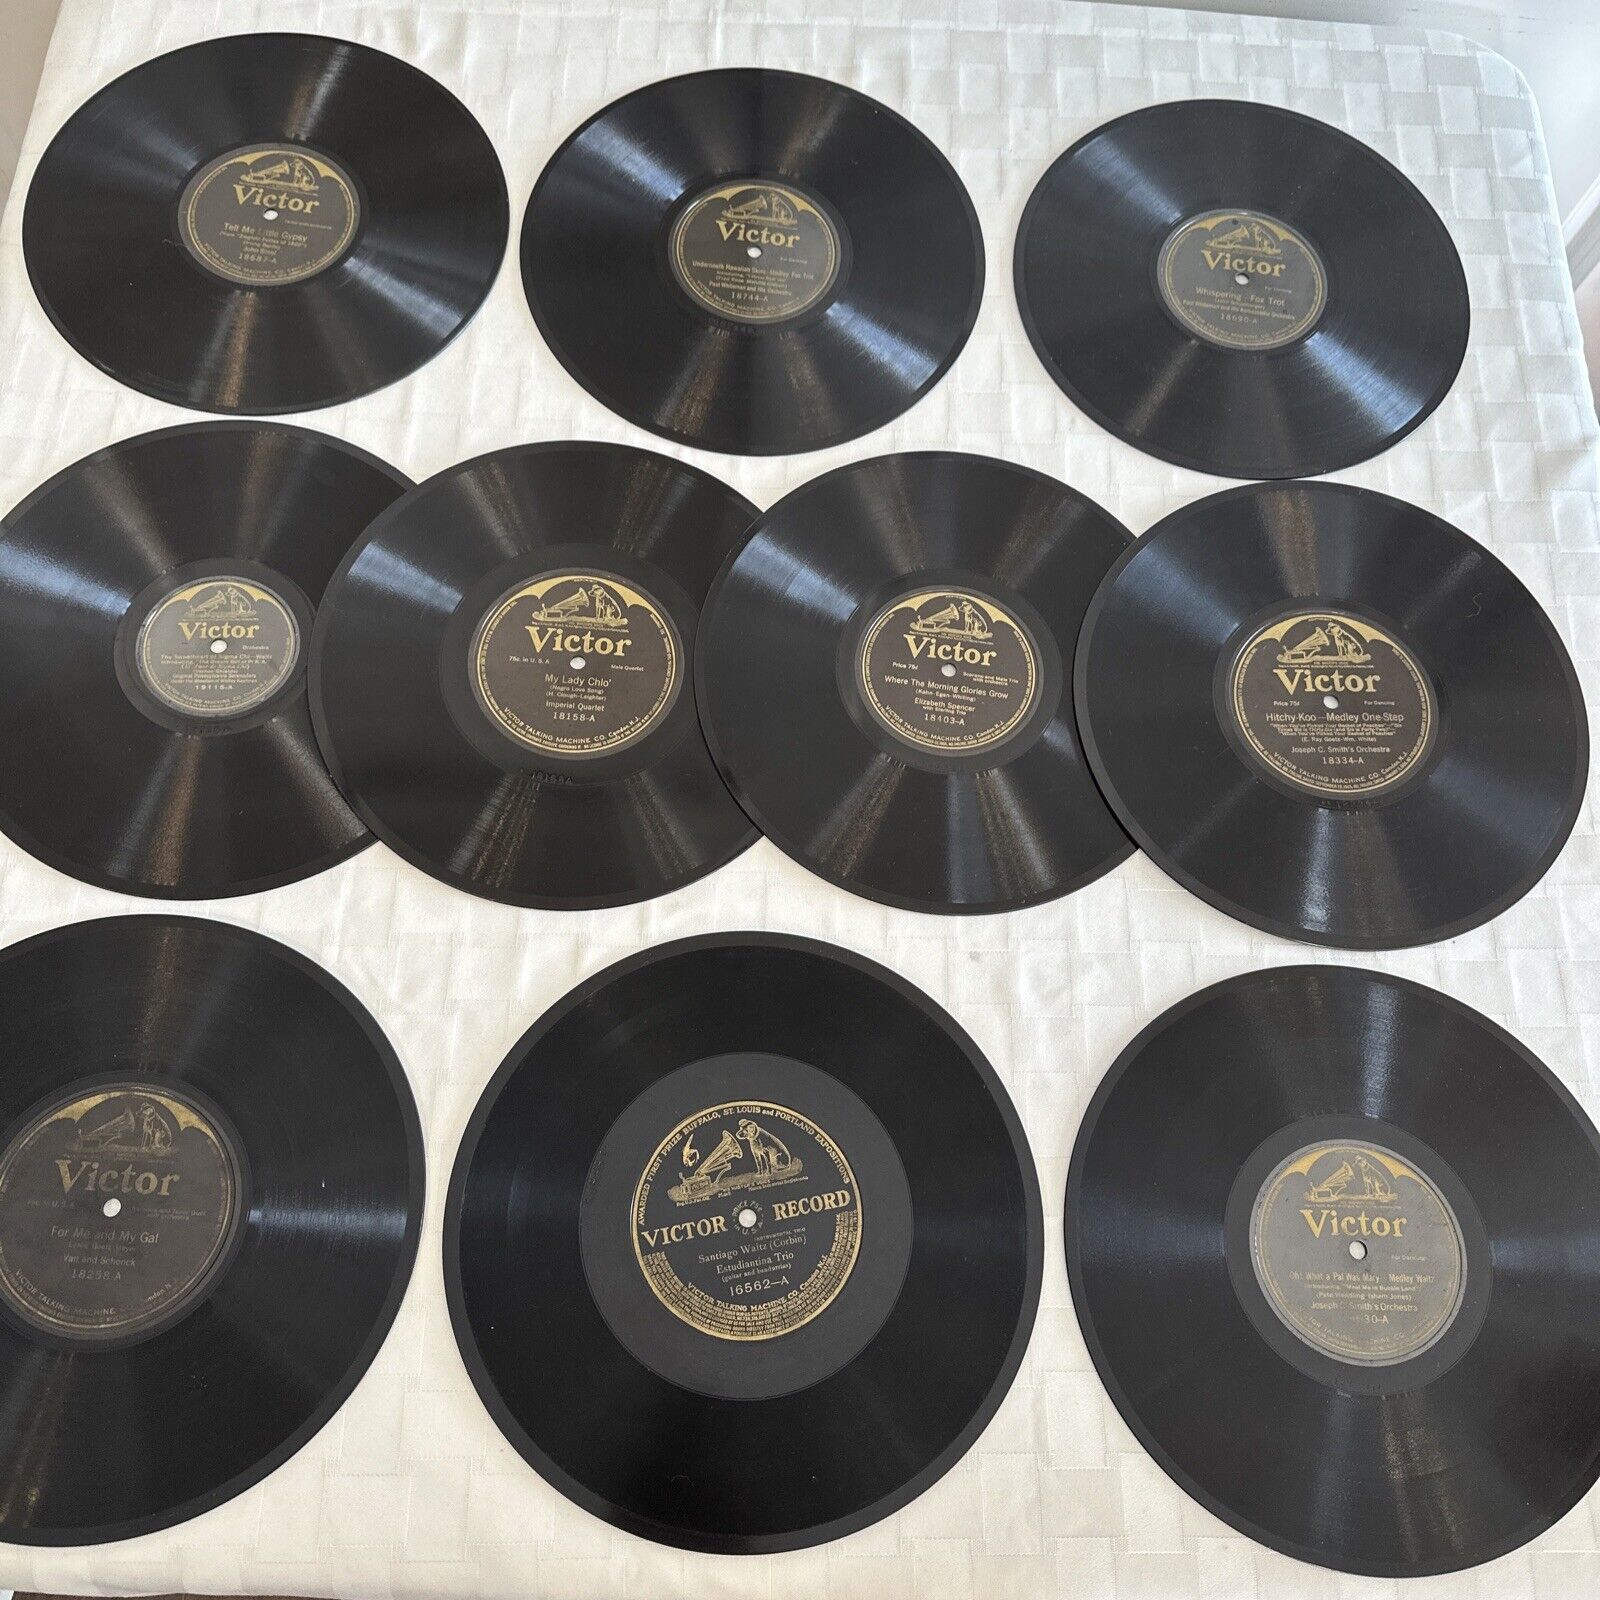 Lot 10 Vintage Victor Records 78RPM 10” 1920-1940s Various Genres And Artists #4